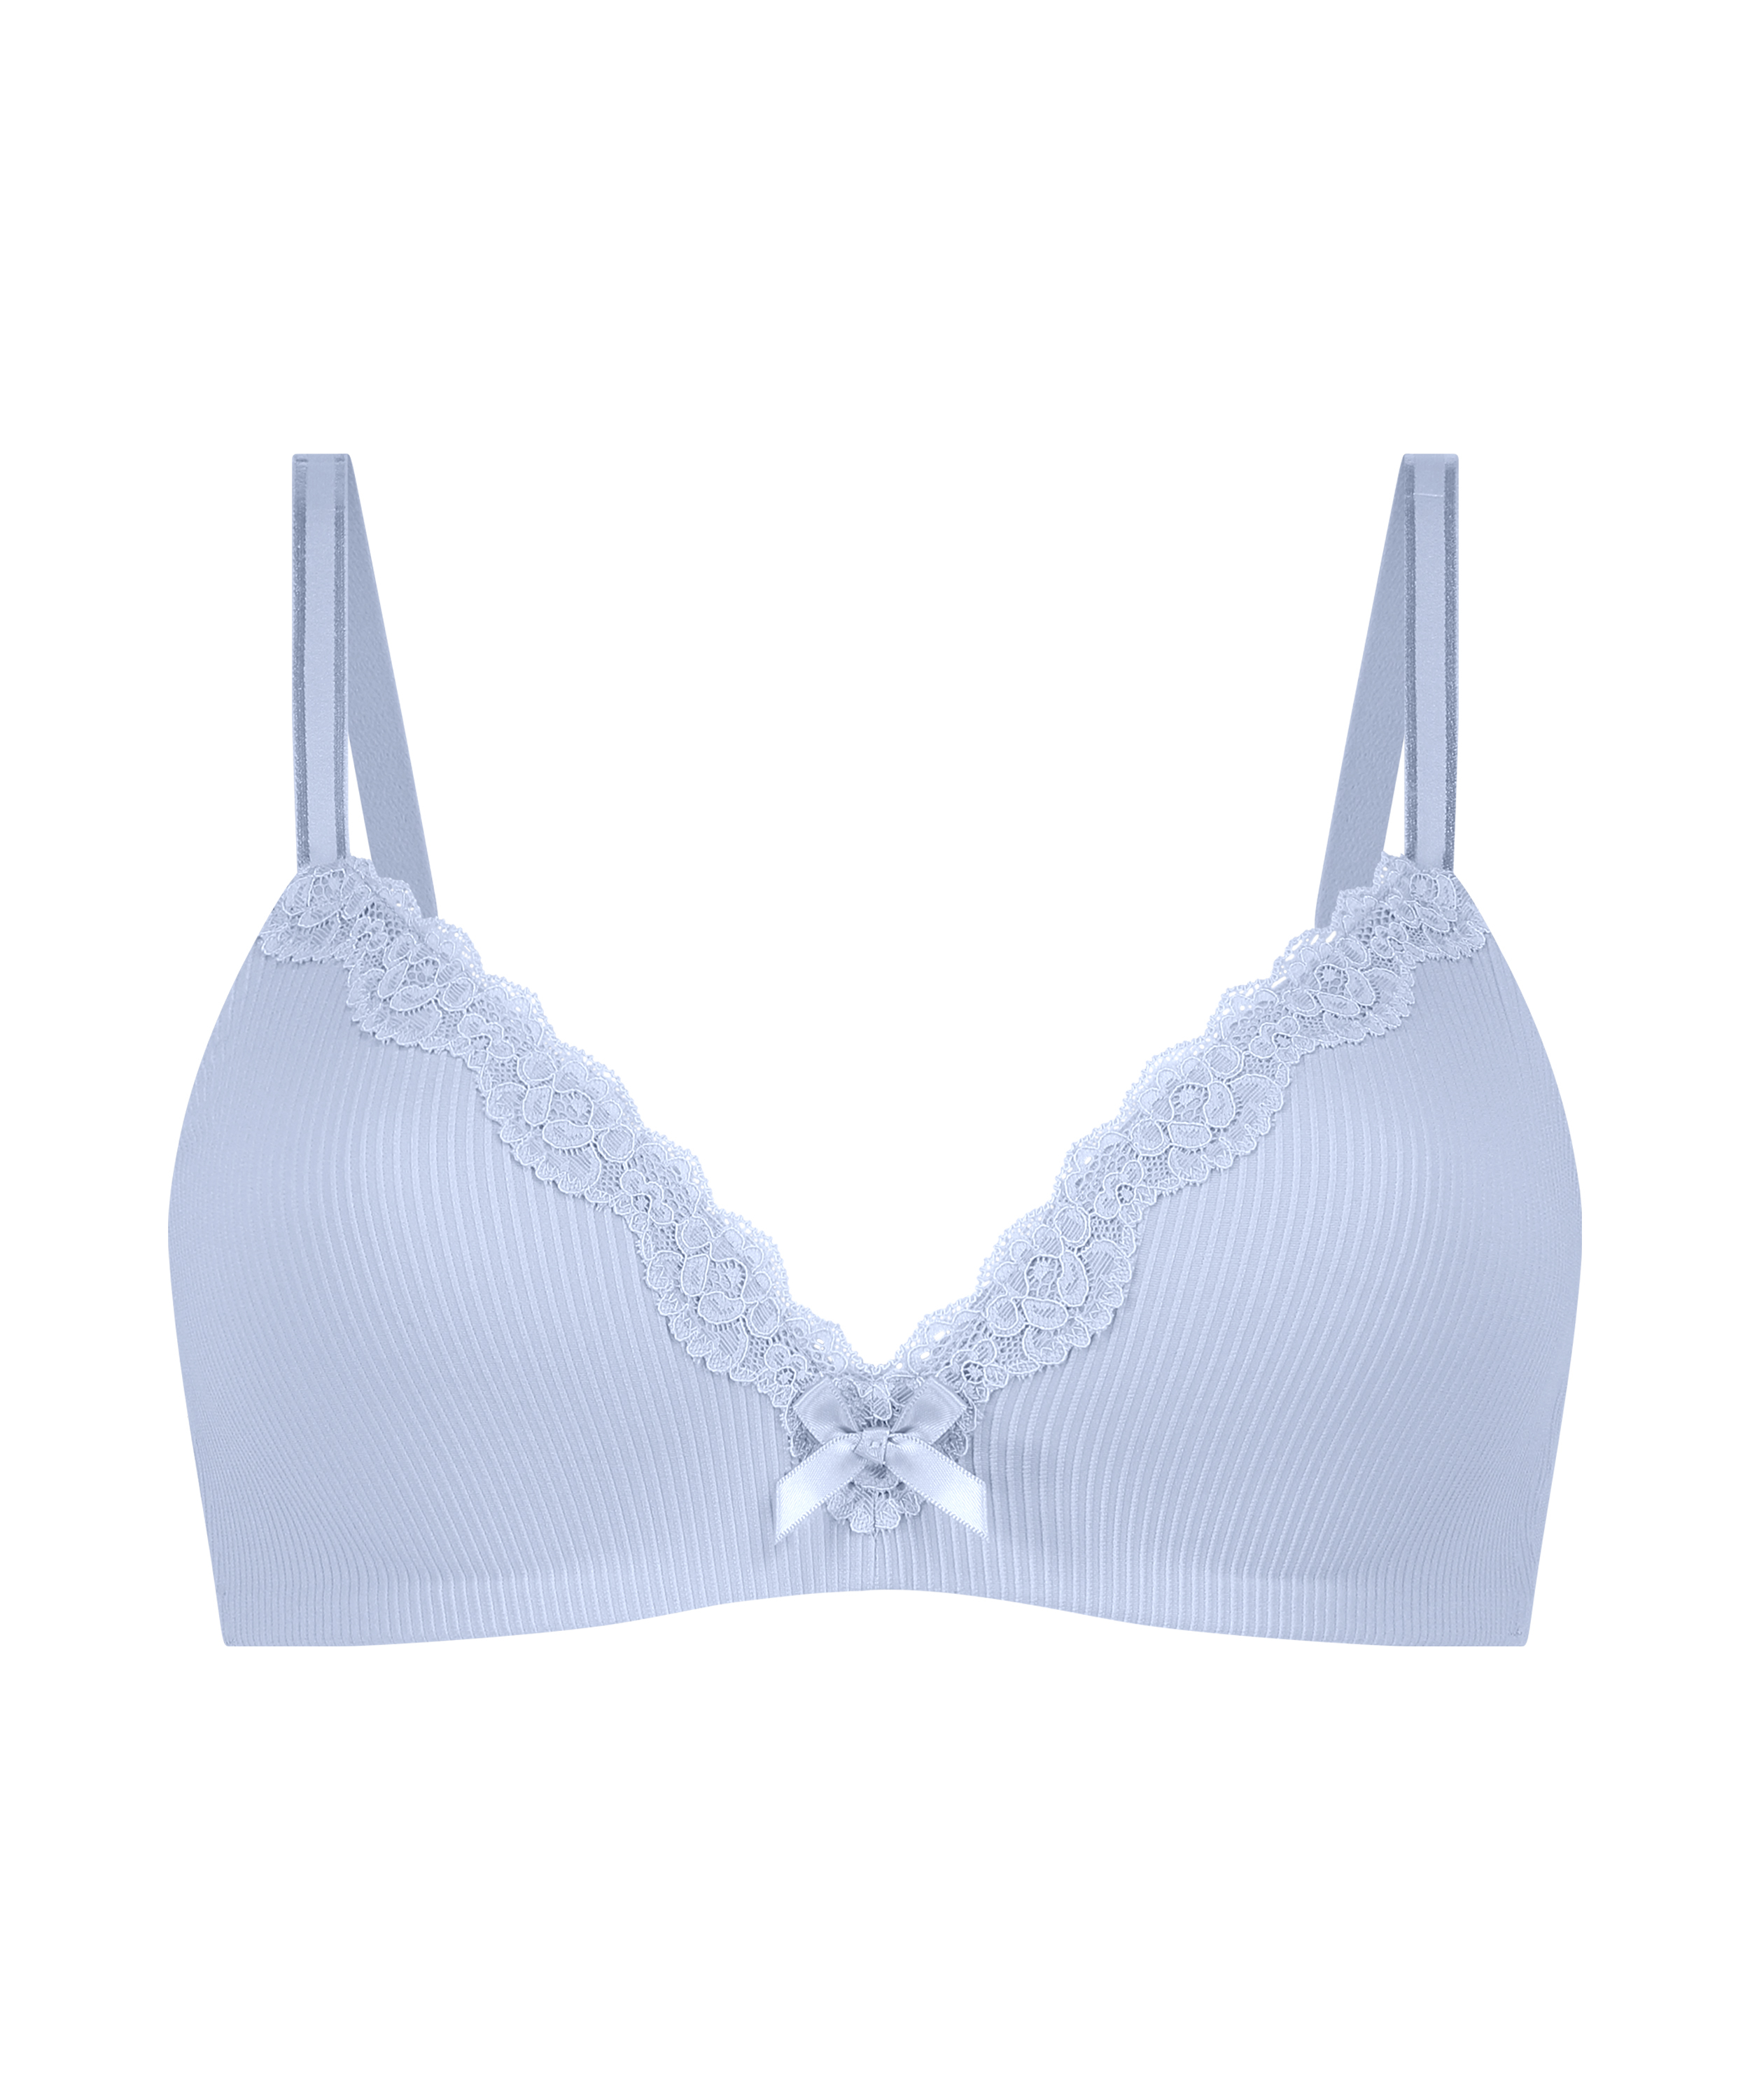 Lola Padded Non-Wired Bra, Blue, main